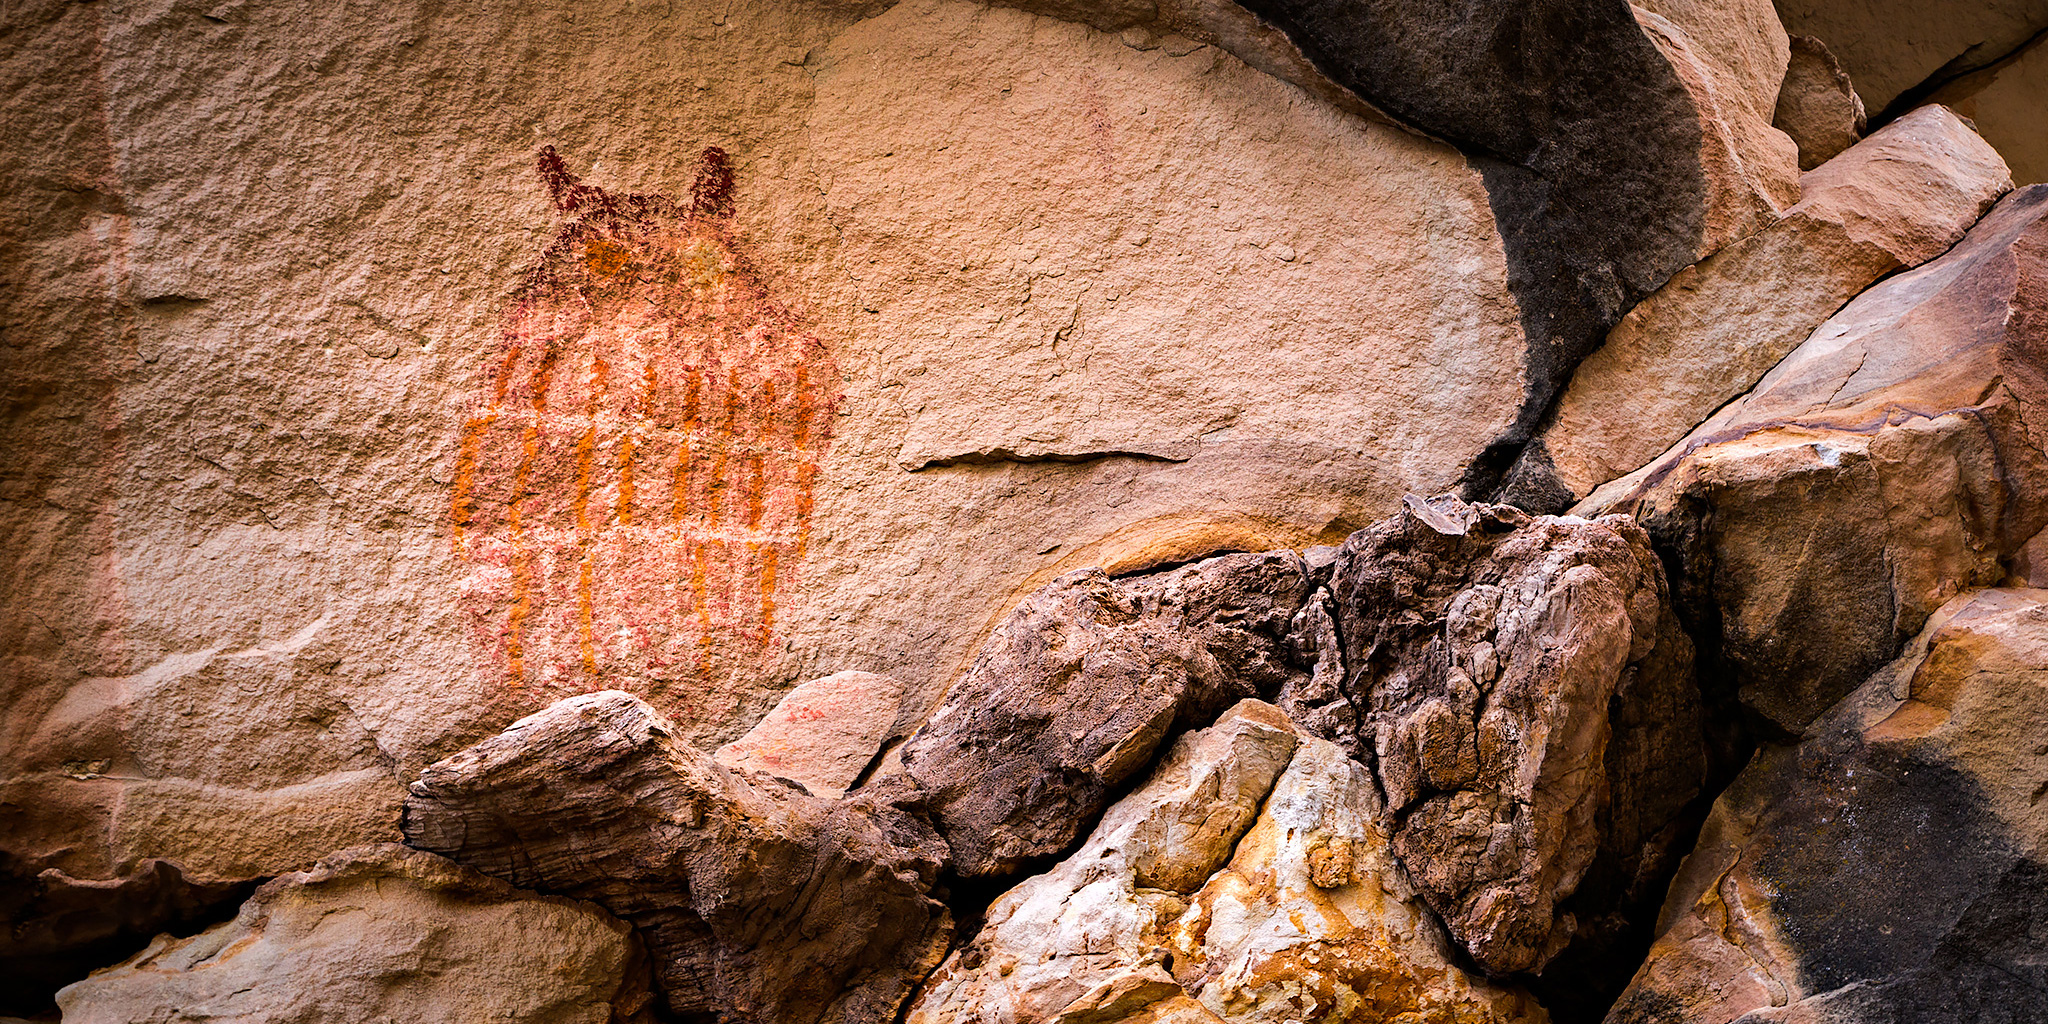 Revisiting The Owl Pictograph